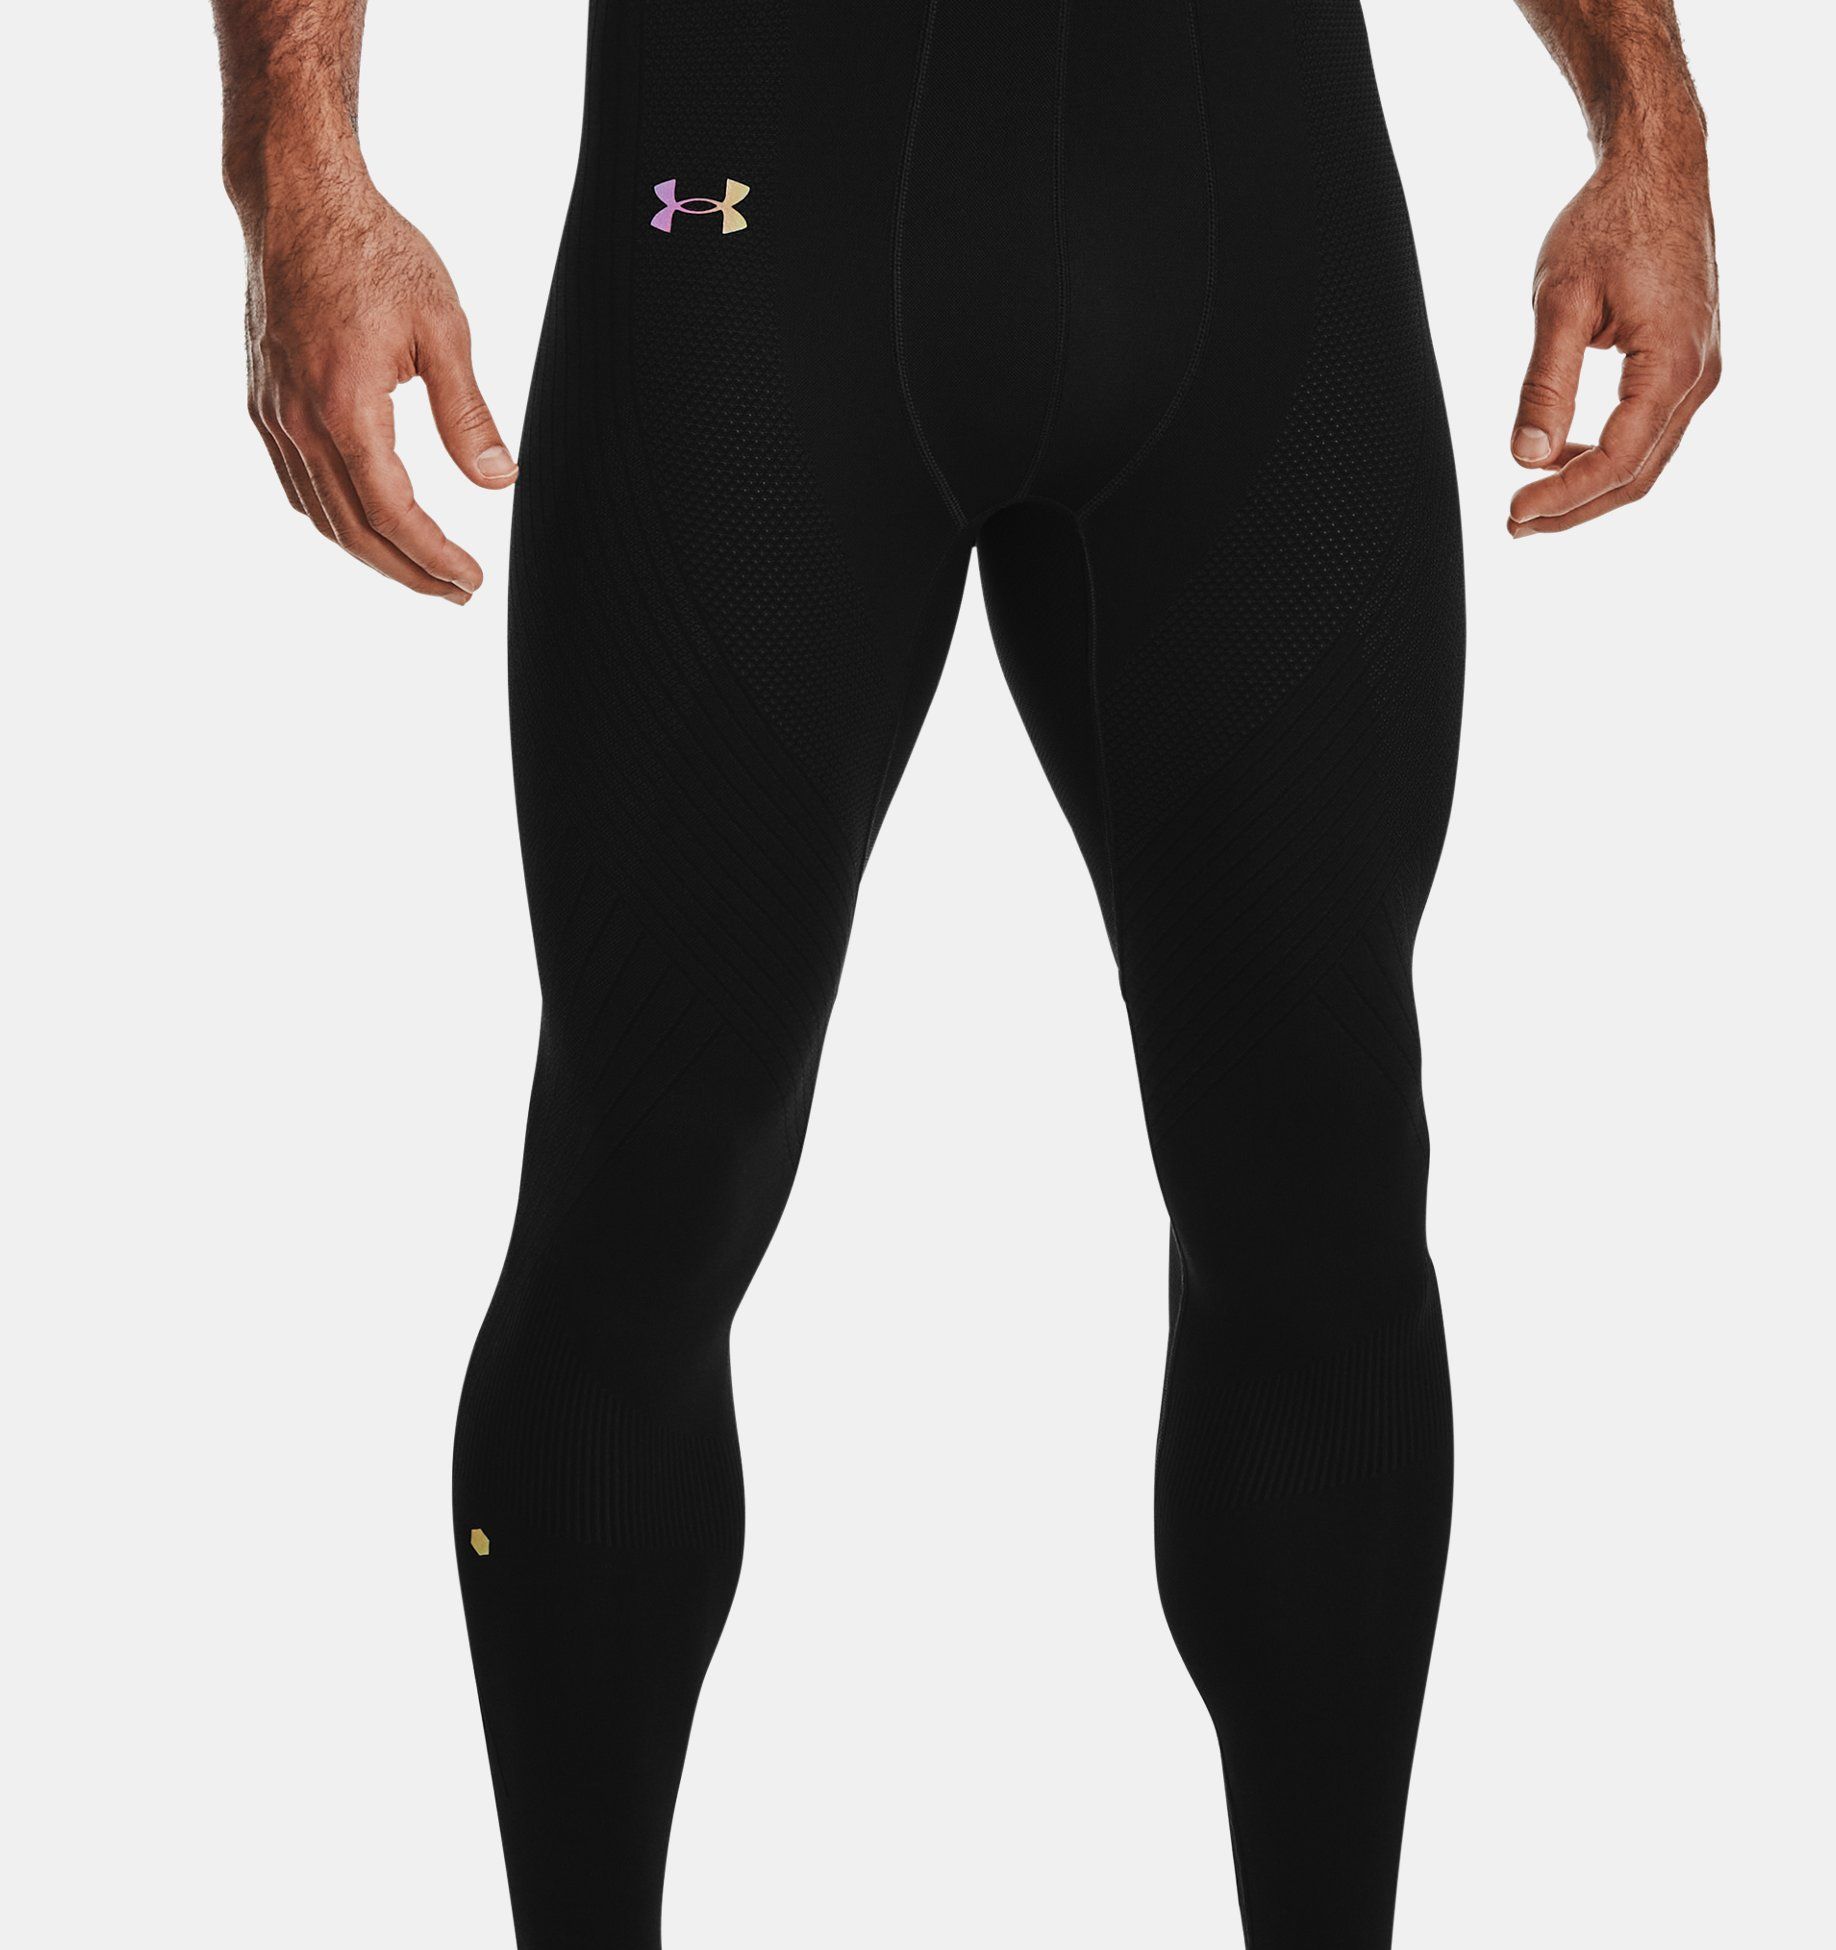 TAUWELL Men's Sports Compression Tights Leggings X-Large 6113 Gold 